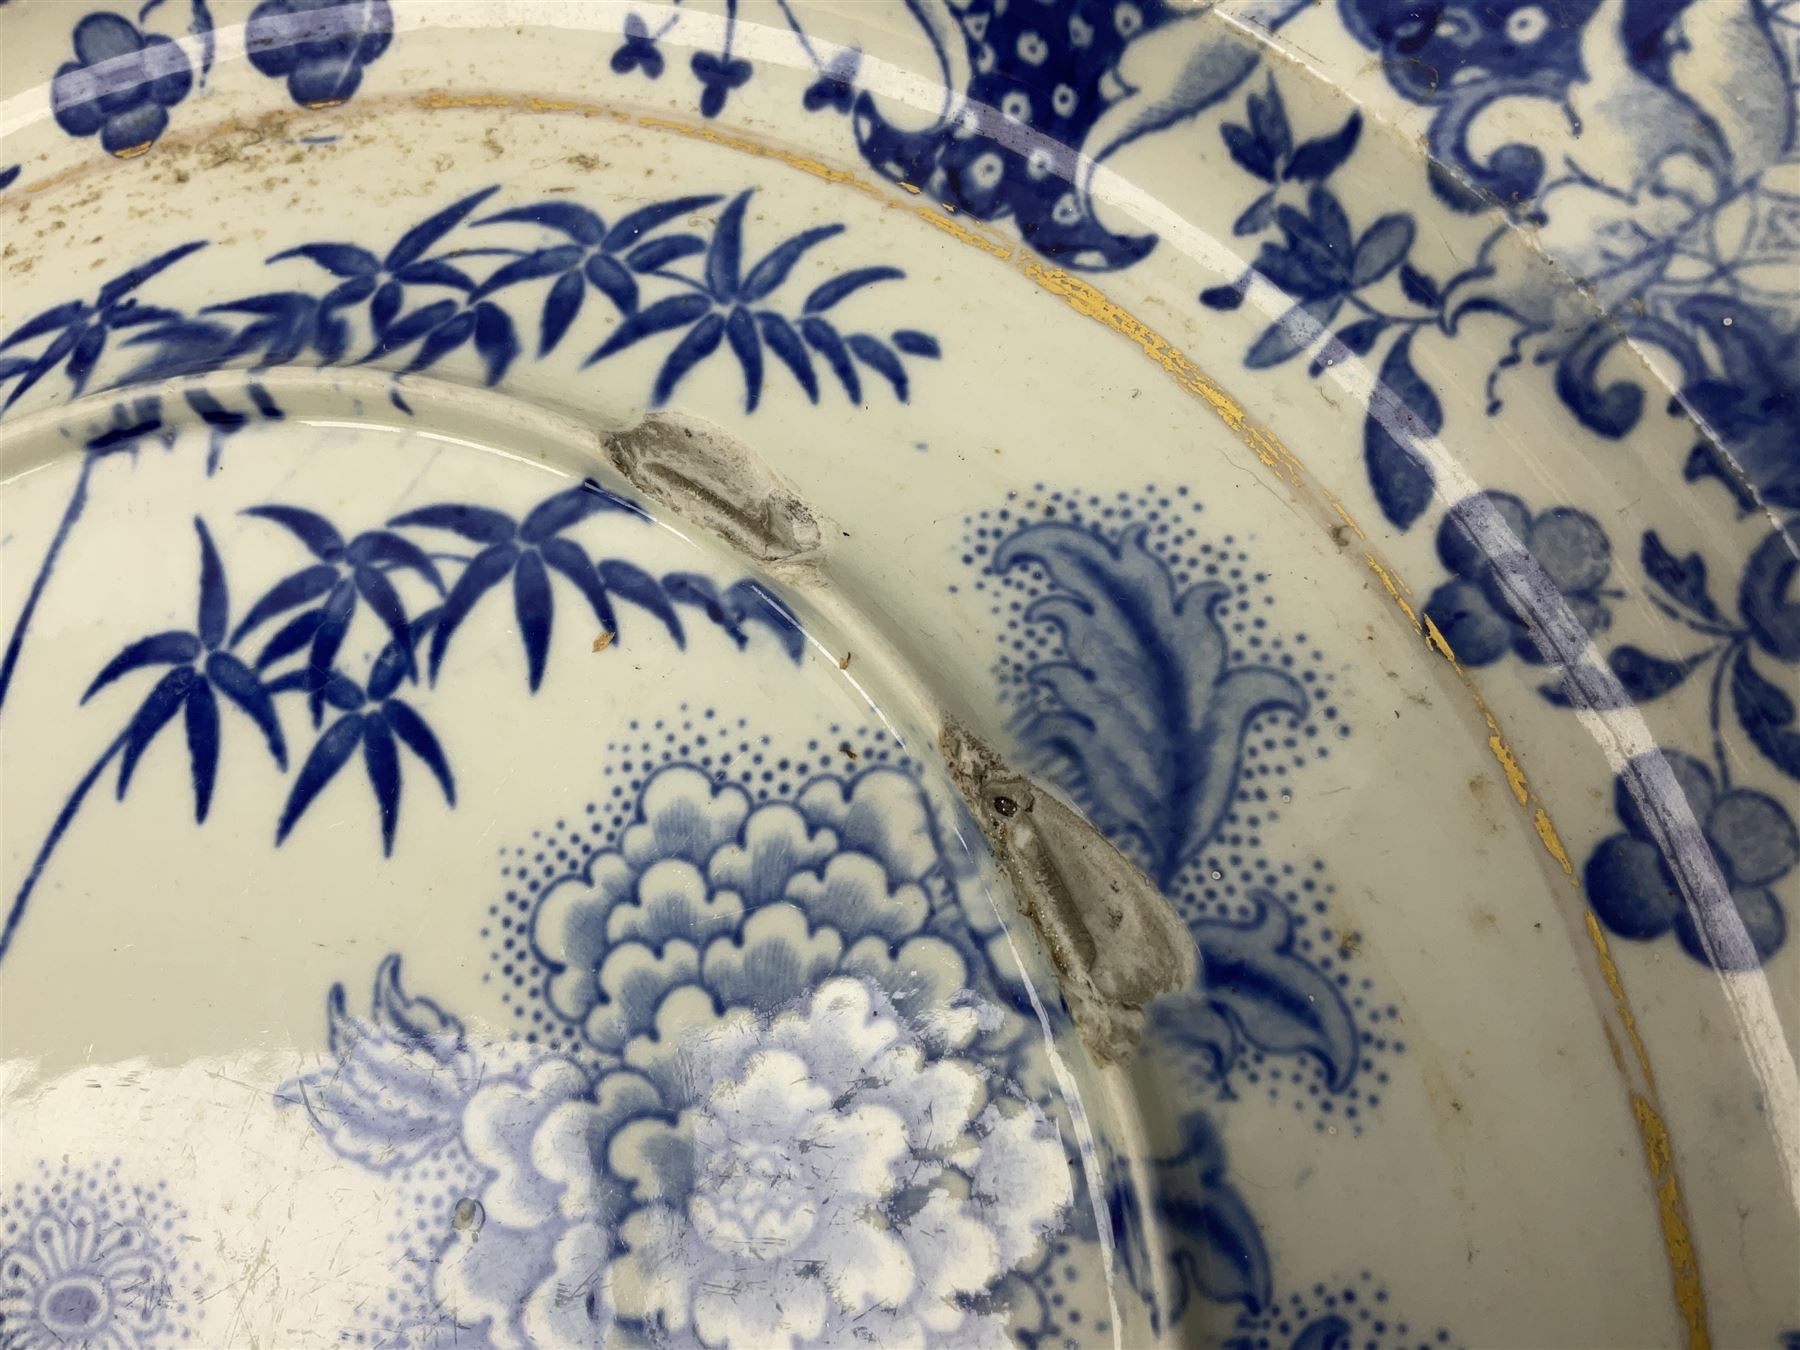 19th century Davenport bamboo and peony pattern dinner wares - Image 16 of 17